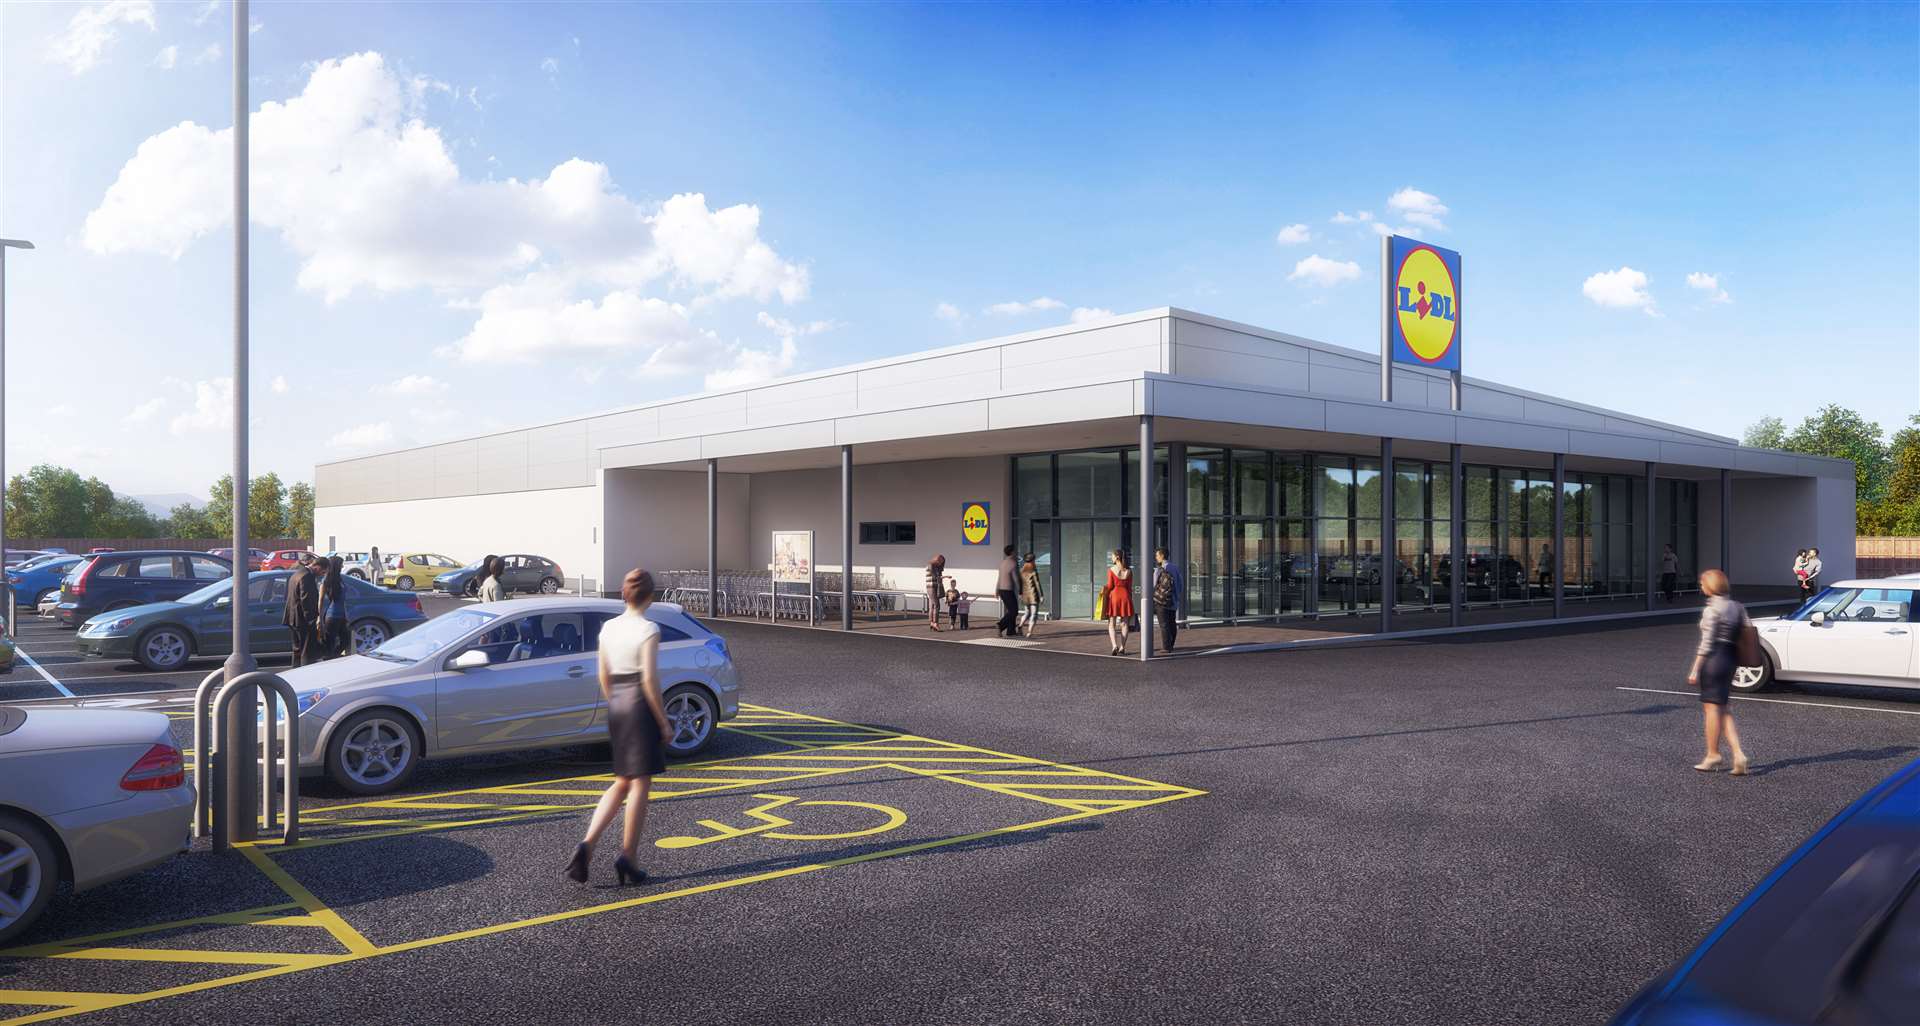 The new Lidl store is being built in Medway Road, Gillingham